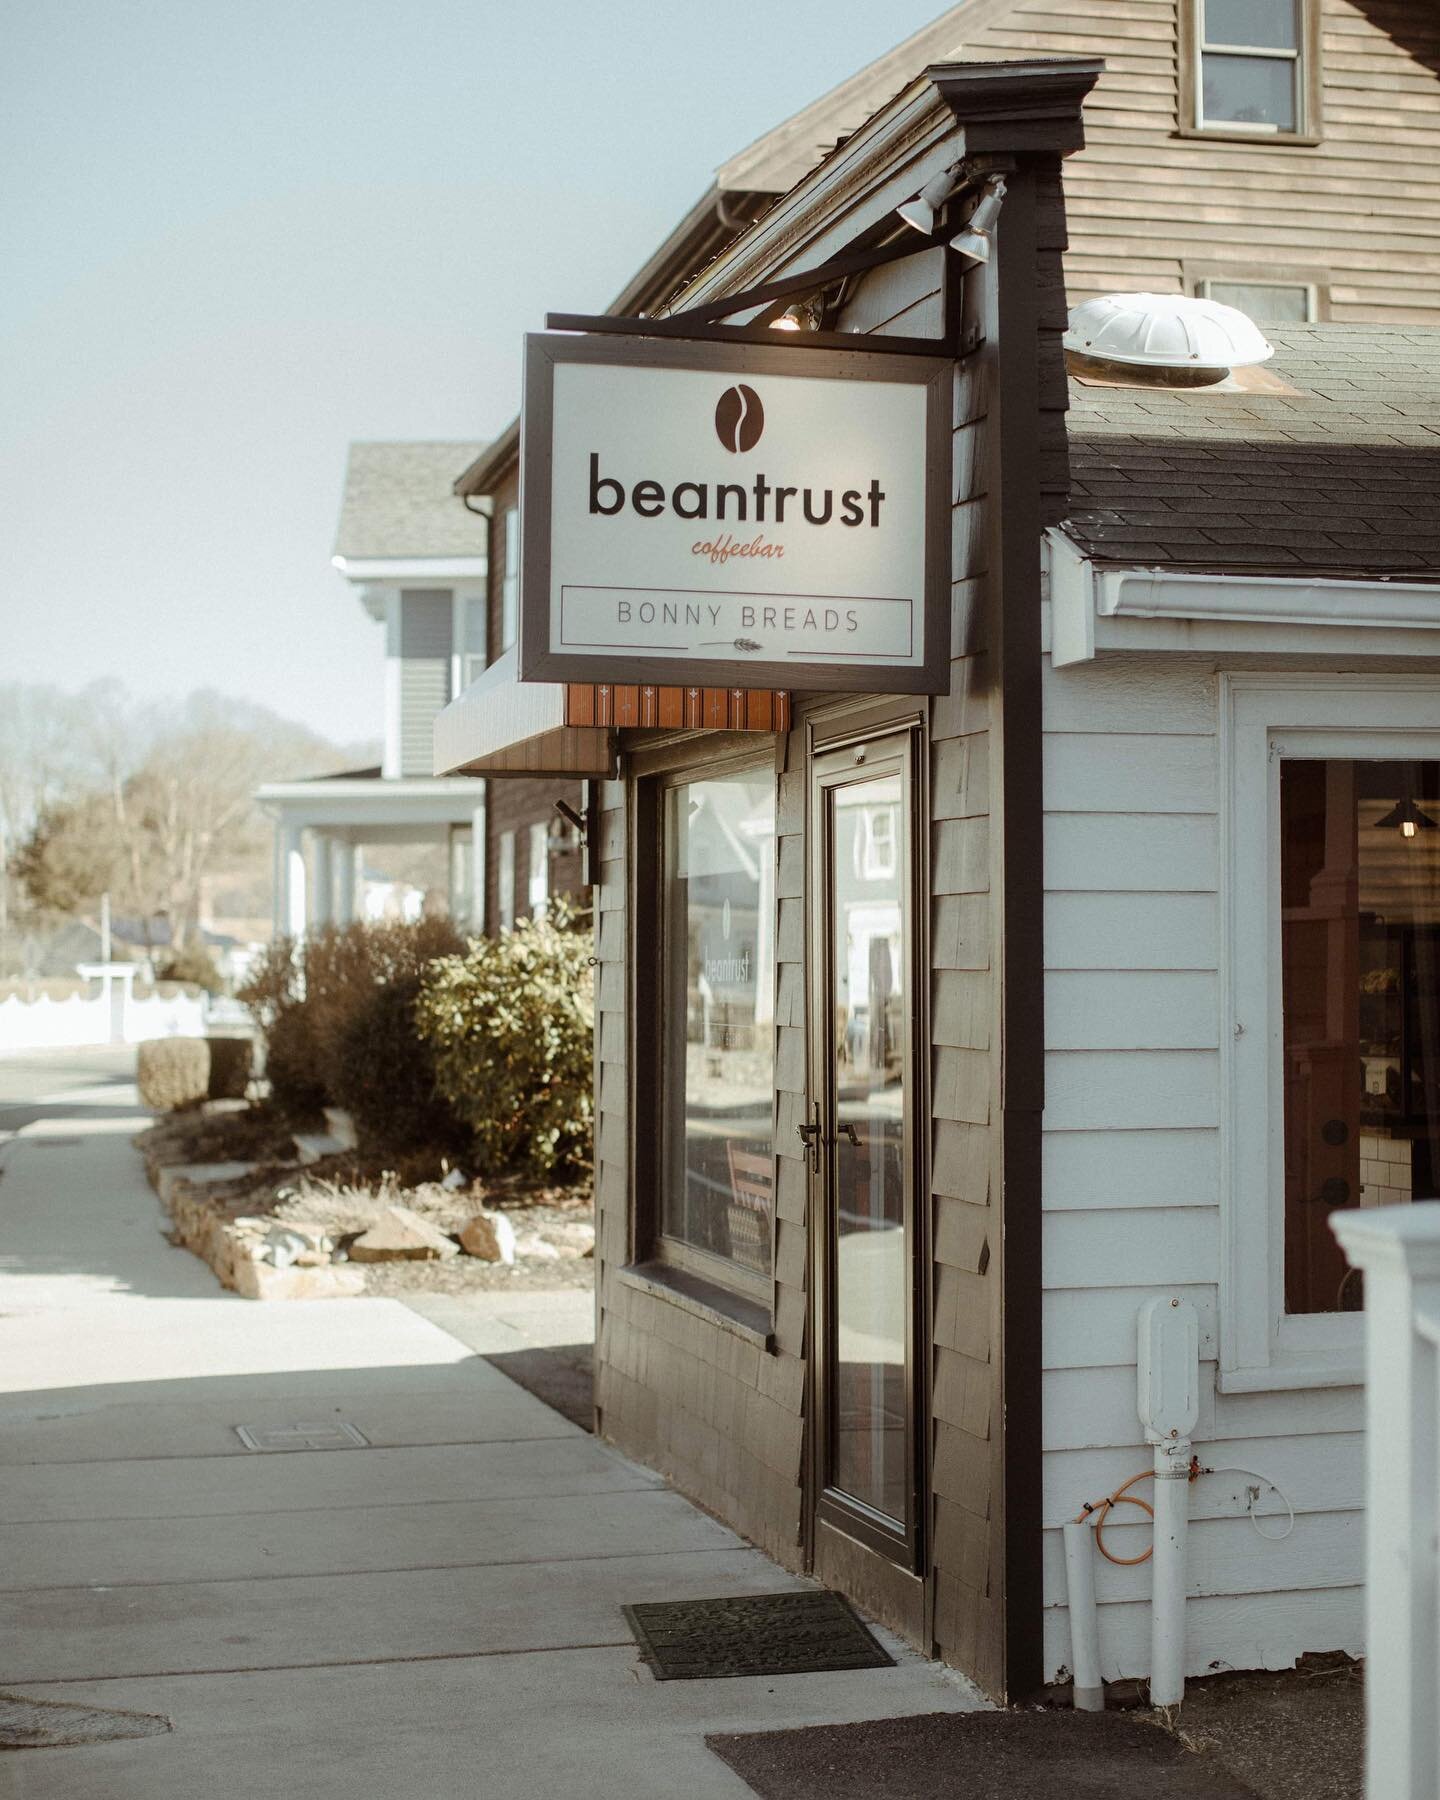 Thankful for everyone&rsquo;s support! It is a joy cultivating community in the Cove&hearts;️

#beantrust 
#beantrustcommunity 
#beantrustcoffeebar 
#beantrustbench 
#beverlymassachusetts 
#beverlyma 
#joy